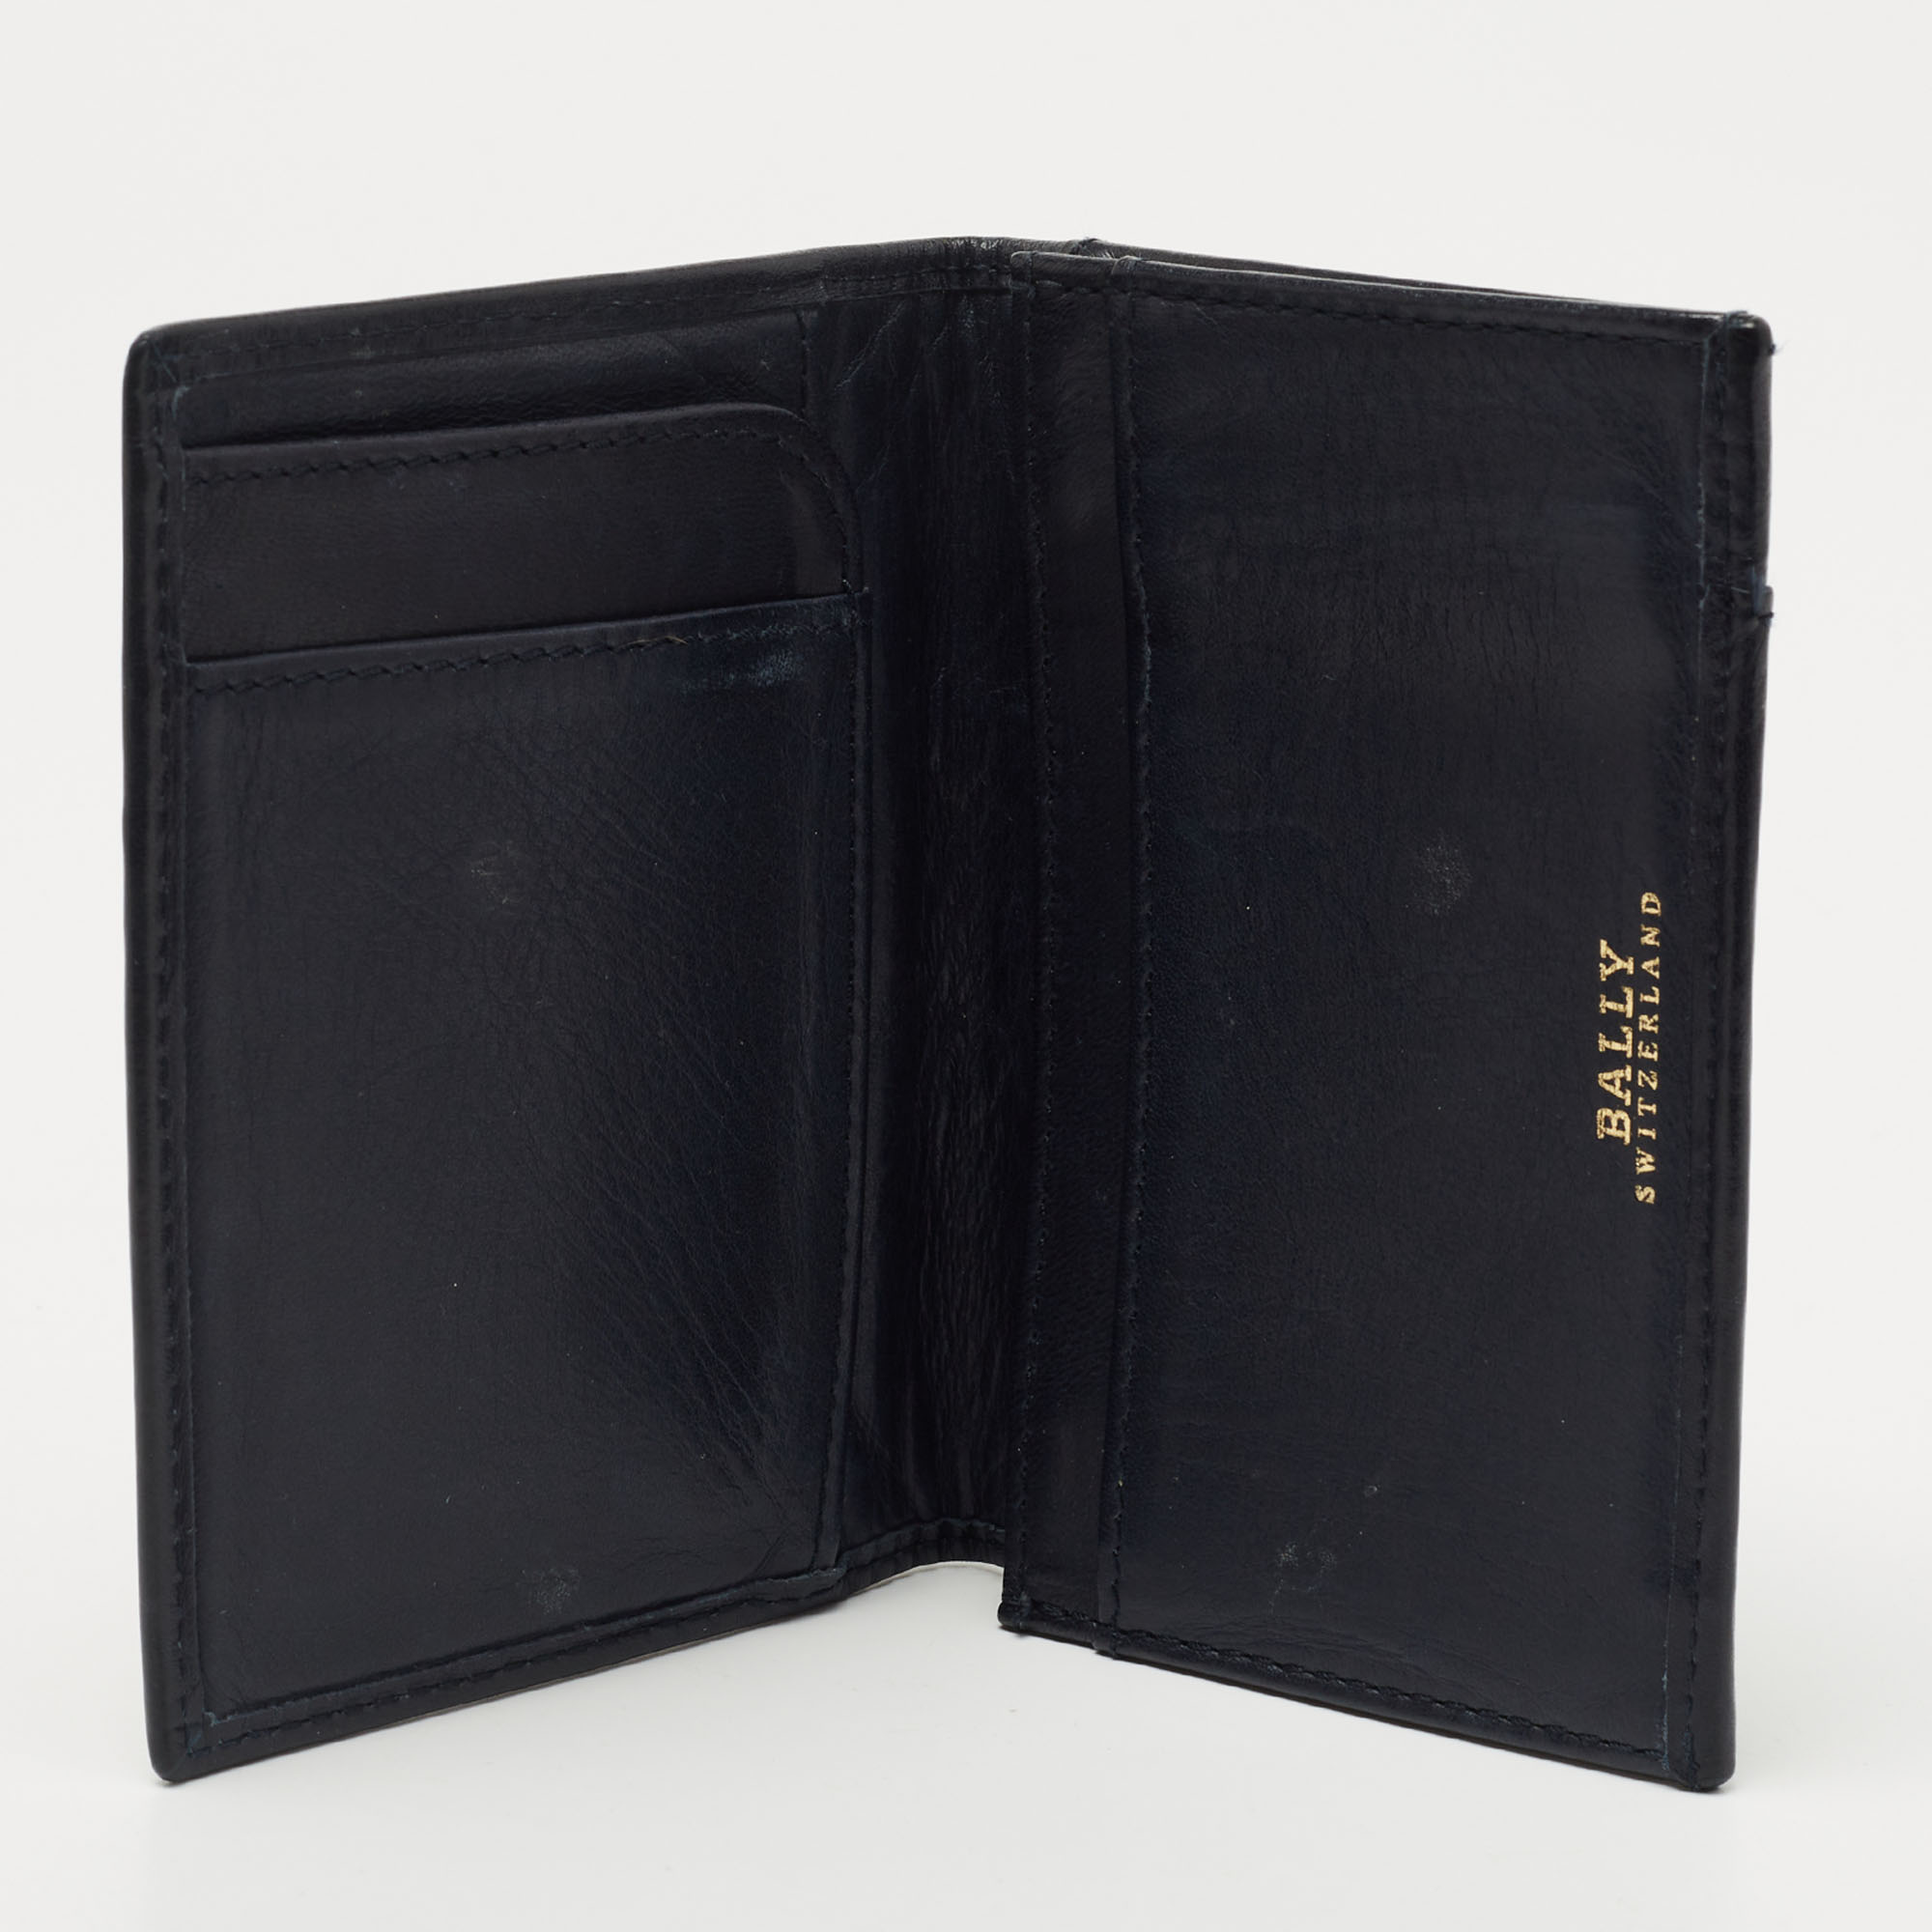 Bally Navy Blue Leather And Canvas Web Bifold Card Case